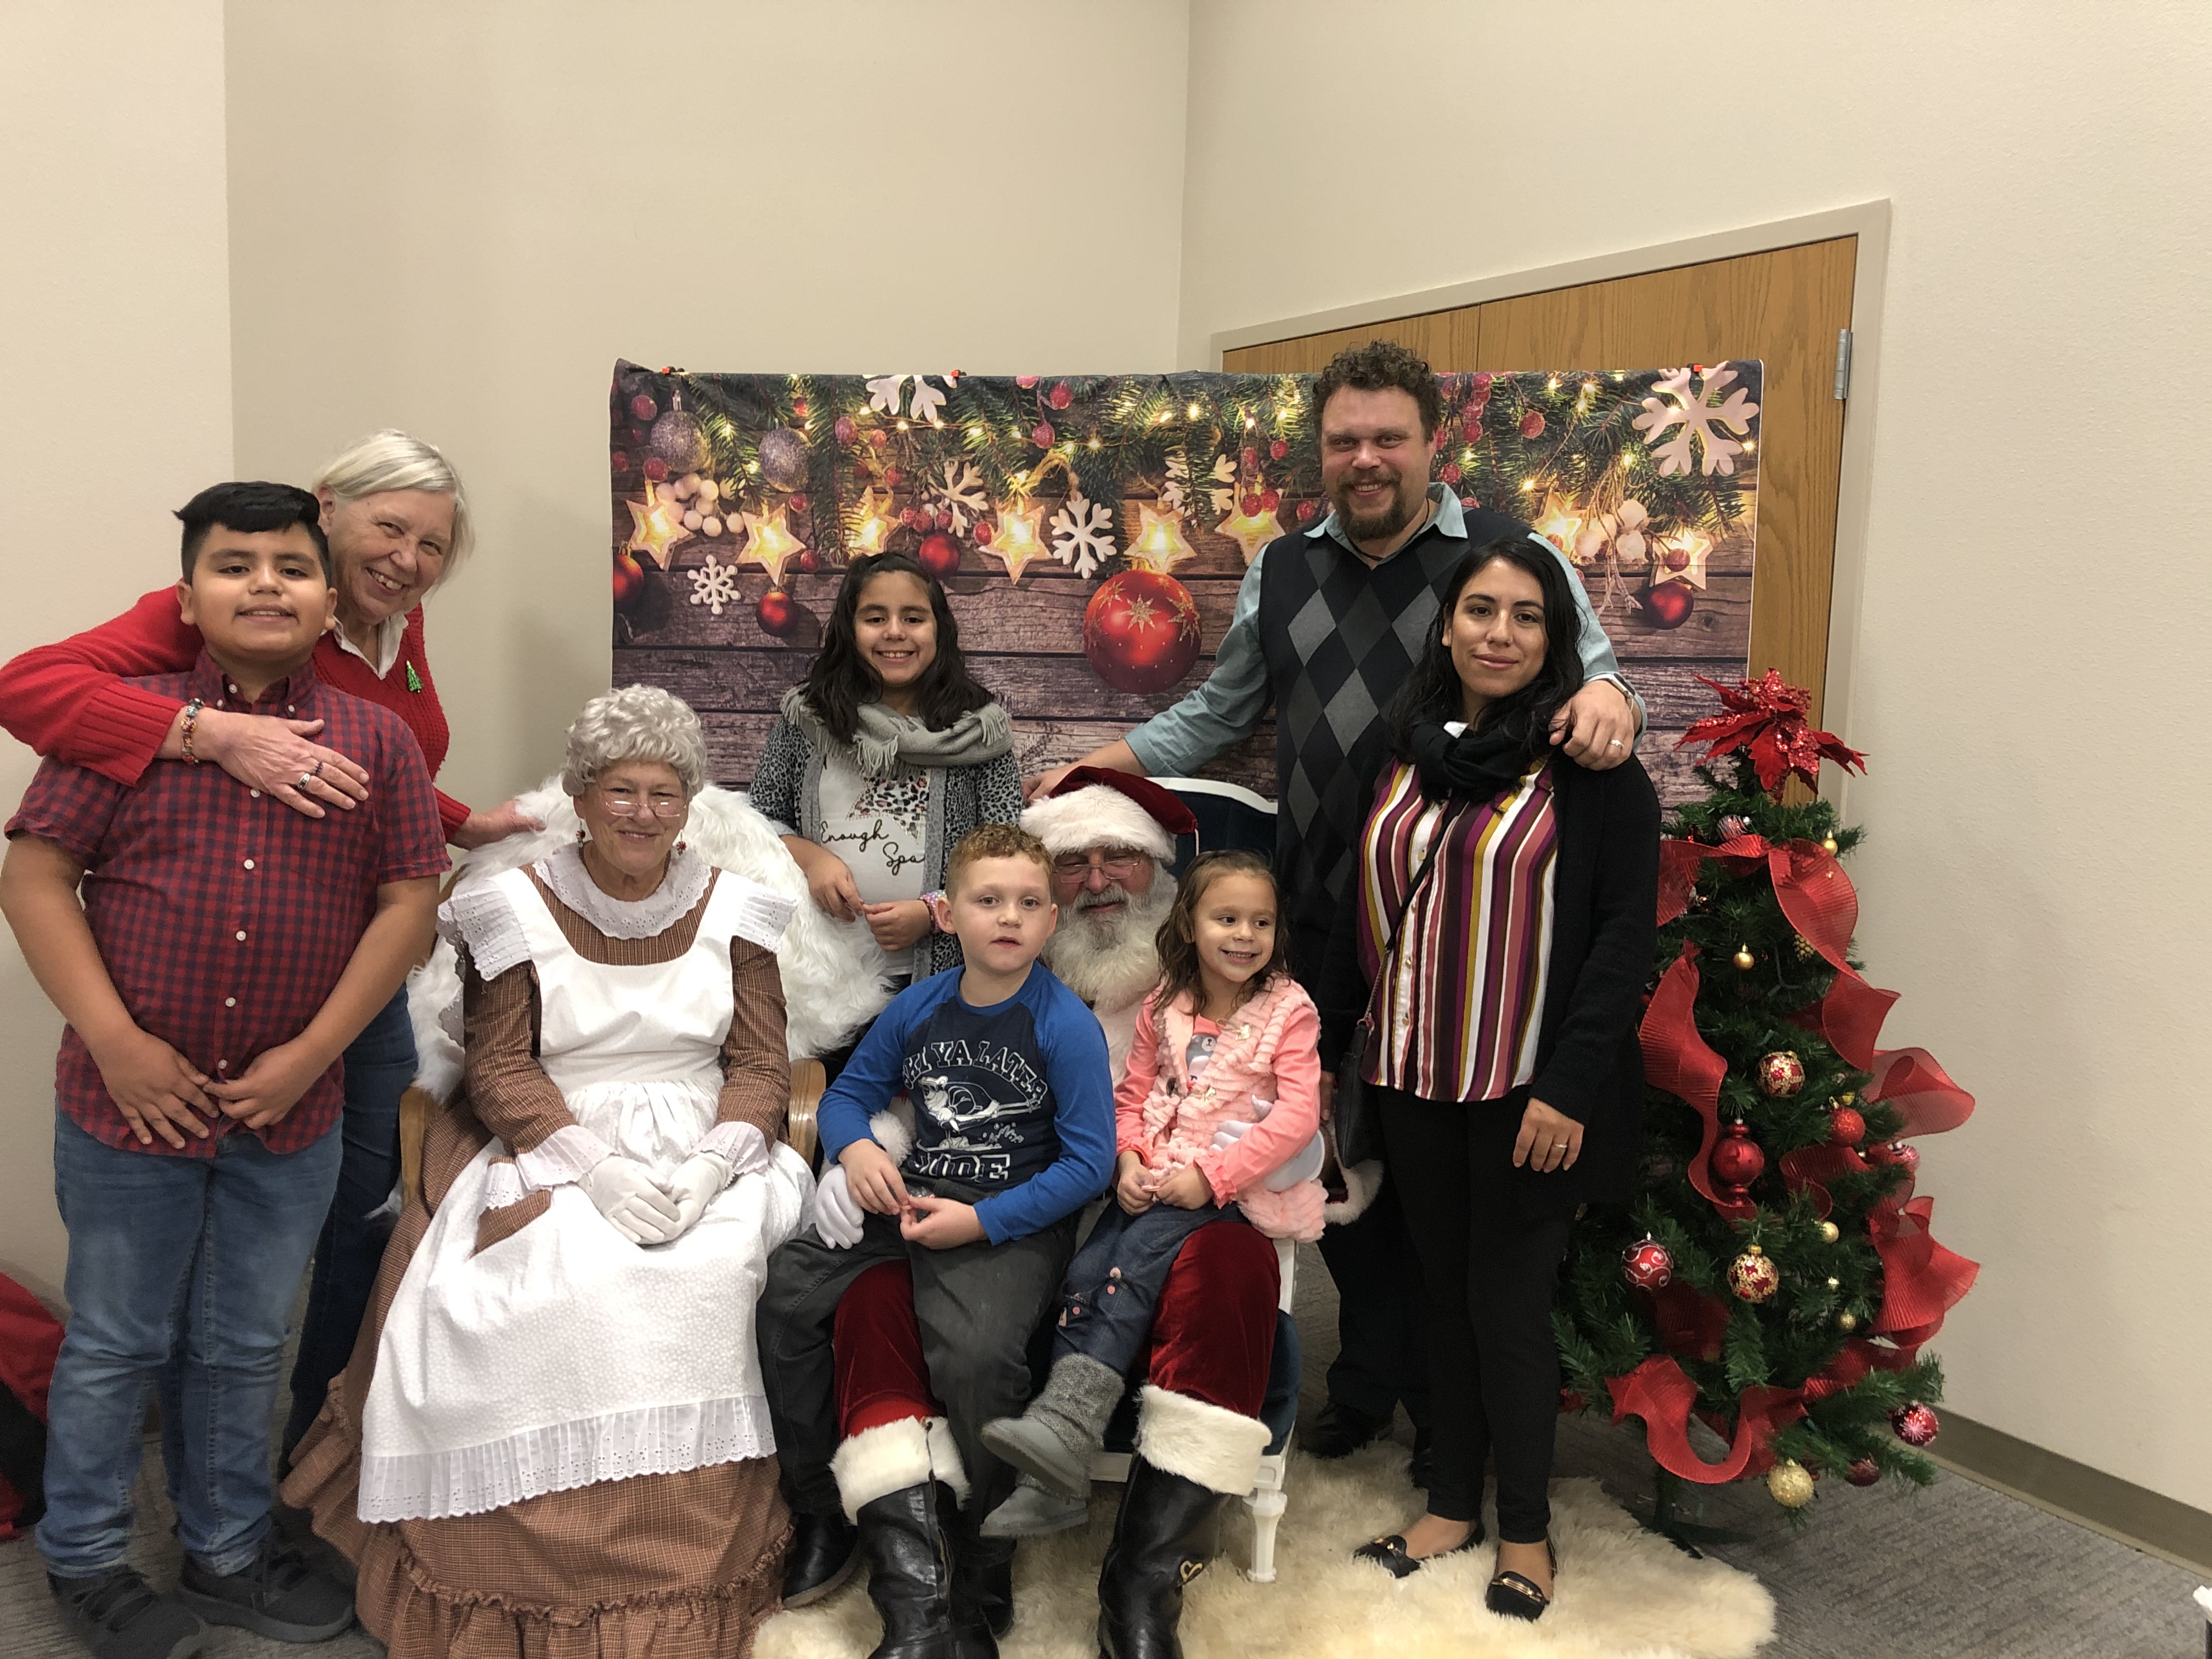 A photo of my family posing with Santa Clause at the EFH 2019 Christmas Party